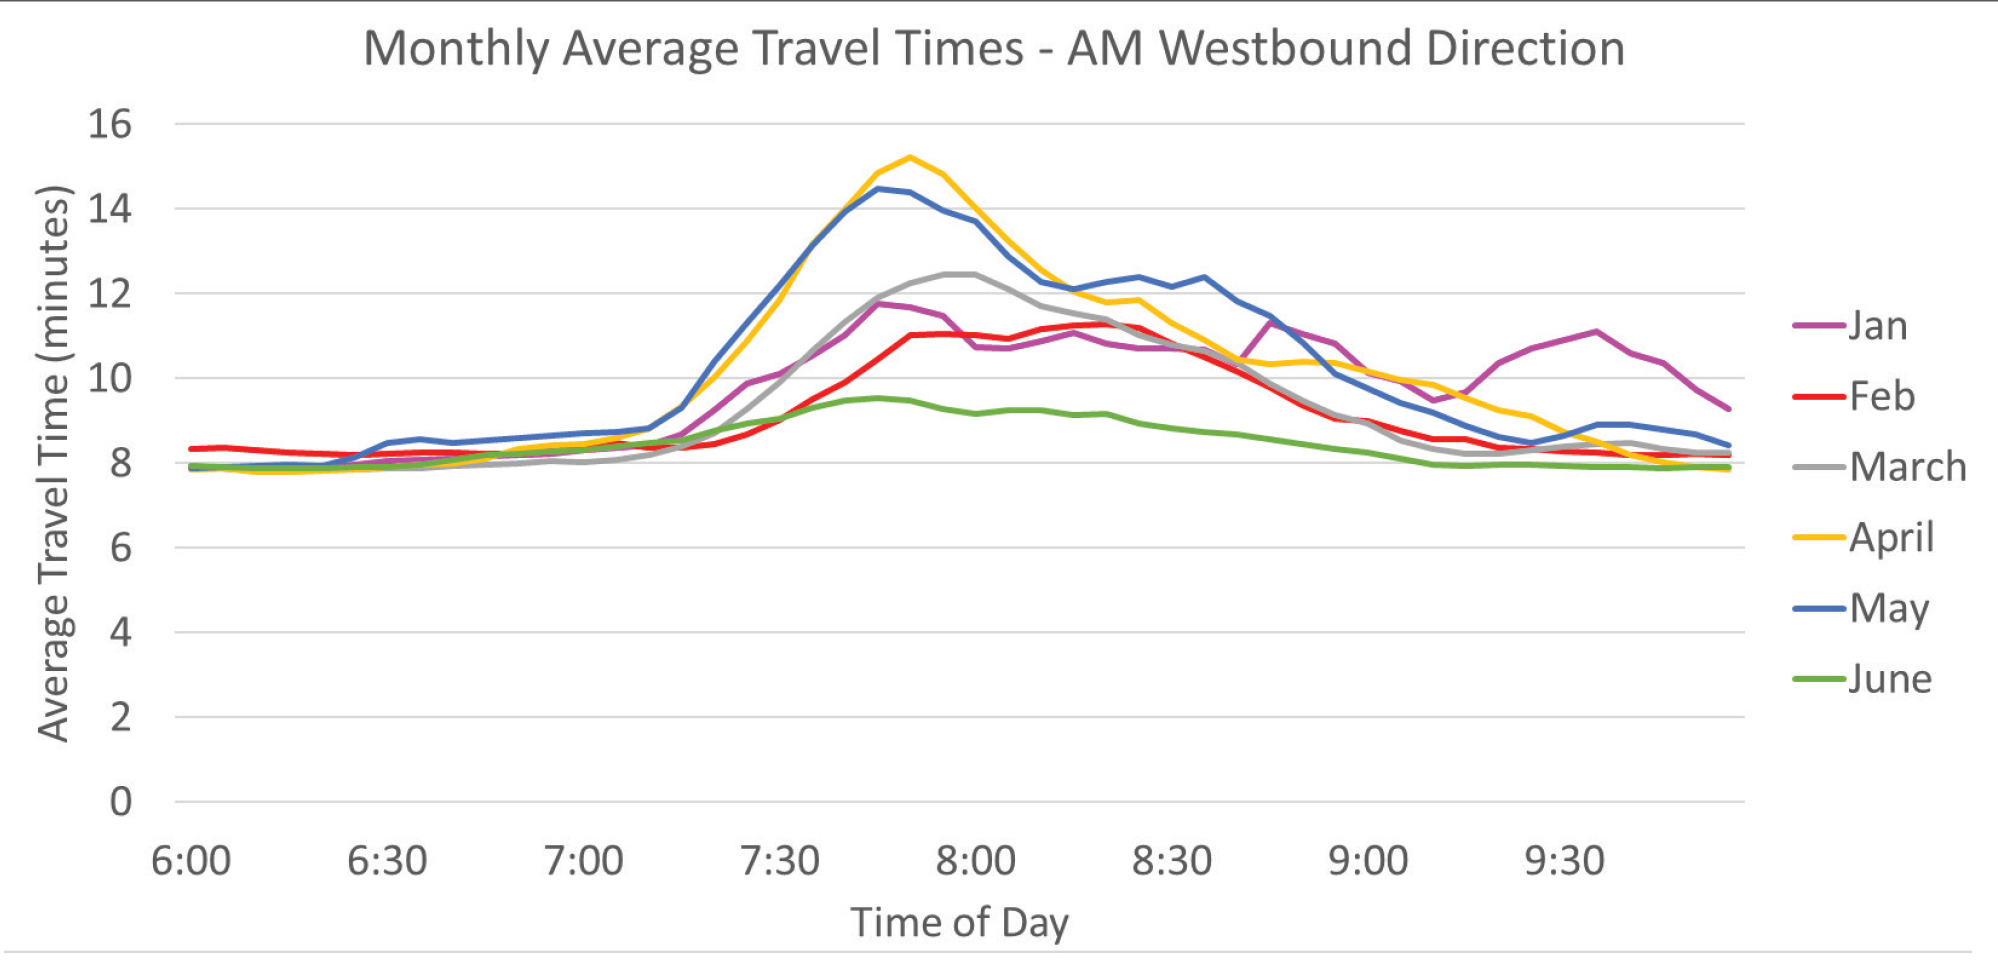 Line graph showing the average travel time by time of day for January through June. Separate lines are provided for each month.